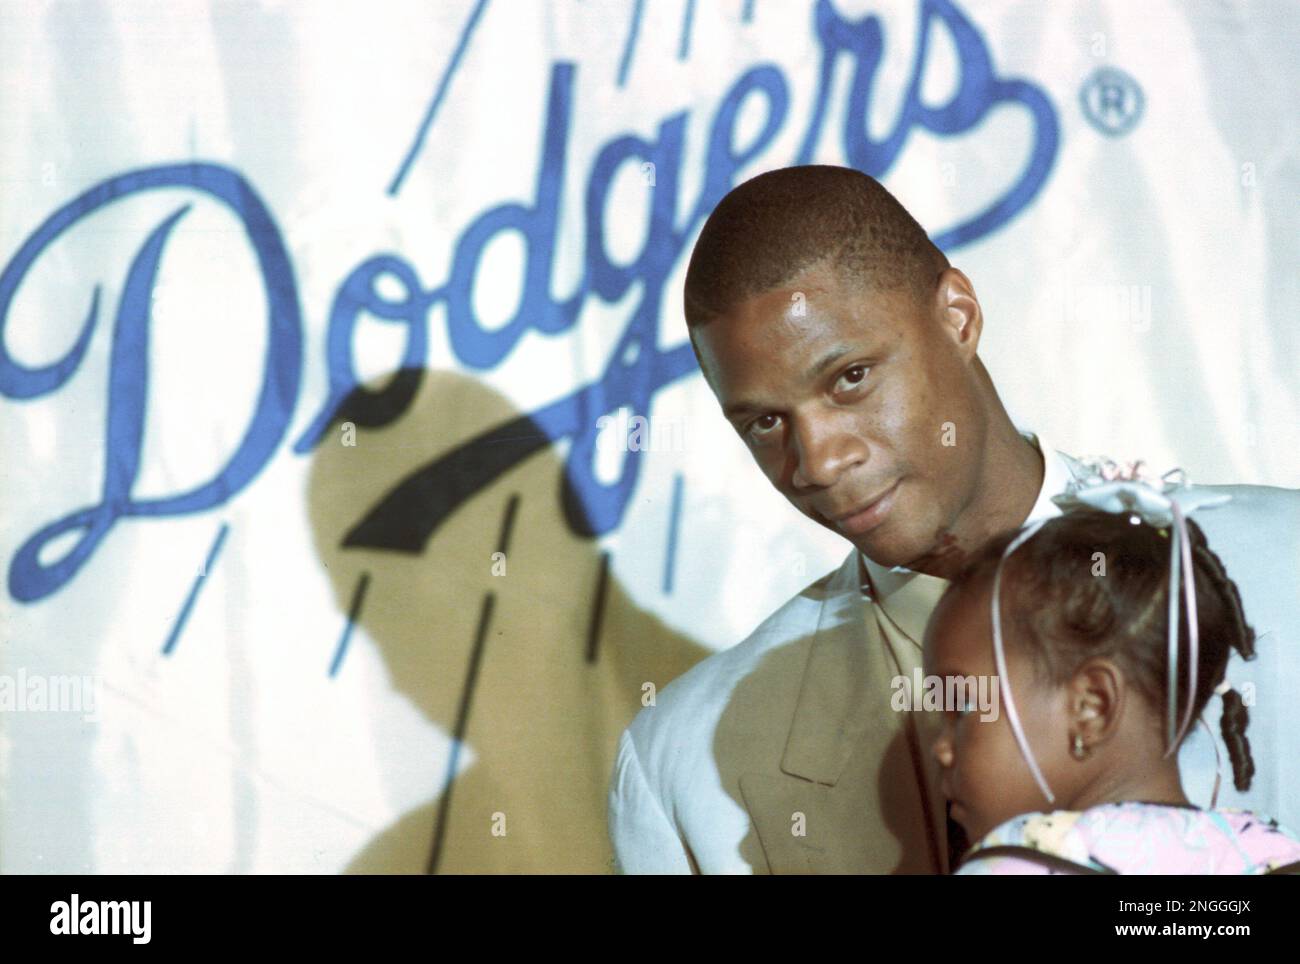 Darryl Strawberry of the Los Angeles Dodgers is shown with his two-year-old  daughter Diamond at a news conference in Los Angeles, Ca., Nov. 9, 1990.  Strawberry signed a five-year $20.3 million contract